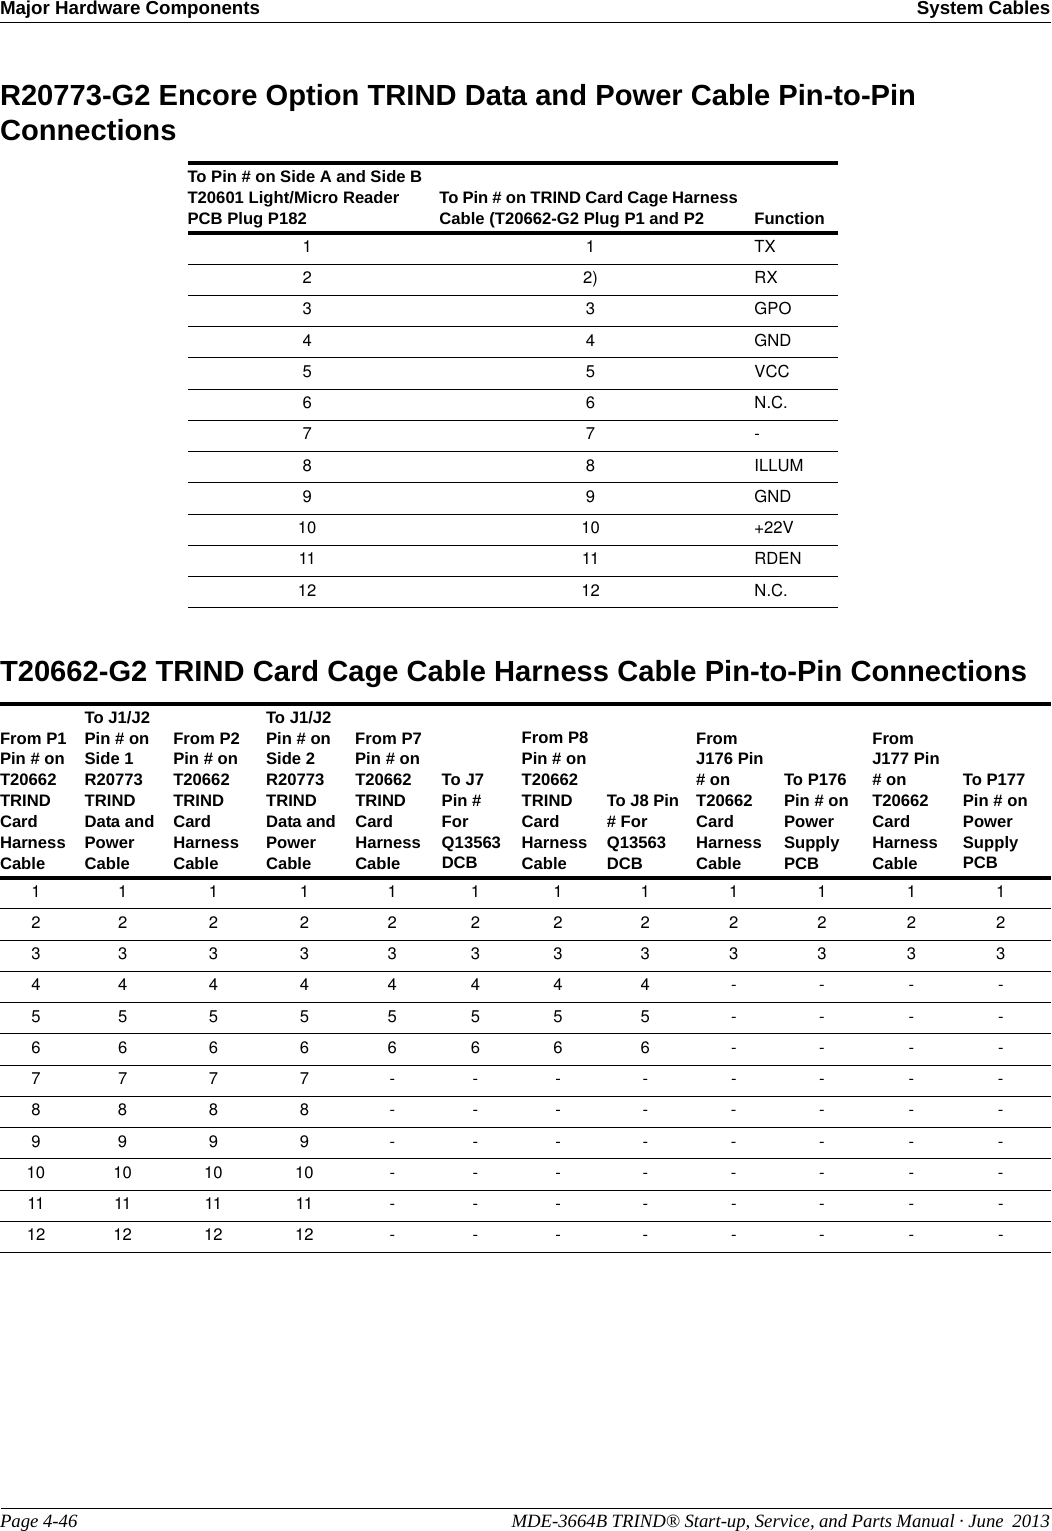 Major Hardware Components System CablesPage 4-46                                                                                                  MDE-3664B TRIND® Start-up, Service, and Parts Manual · June  2013R20773-G2 Encore Option TRIND Data and Power Cable Pin-to-Pin ConnectionsTo Pin # on Side A and Side B T20601 Light/Micro Reader PCB Plug P182 To Pin # on TRIND Card Cage Harness Cable (T20662-G2 Plug P1 and P2 Function1 1 TX22) RX3 3 GPO4 4 GND5 5 VCC6 6 N.C.7 7 -8 8 ILLUM9 9 GND10 10 +22V11 11 RDEN12 12 N.C.T20662-G2 TRIND Card Cage Cable Harness Cable Pin-to-Pin ConnectionsFrom P1 Pin # on T20662 TRIND Card Harness CableTo J1/J2 Pin # on Side 1 R20773 TRIND Data and Power CableFrom P2 Pin # on T20662 TRIND Card Harness CableTo J1/J2 Pin # on Side 2 R20773 TRIND Data and Power CableFrom P7 Pin # on T20662 TRIND Card Harness CableTo J7 Pin # For Q13563 DCB From P8 Pin # on T20662 TRIND Card Harness CableTo J8 Pin # For Q13563 DCBFrom J176 Pin # on T20662 Card Harness Cable To P176 Pin # on Power Supply PCBFrom J177 Pin # on T20662 Card Harness Cable To P177 Pin # on Power Supply PCB1 1 1 1 1 1 1 1 1 1 1 12 2 2 2 2 2 2 2 2 2 2 23 3 3 3 3 3 3 3 3 3 3 34 4 4 4 4 4 4 4 - - - -5 5 5 5 5 5 5 5 - - - -6 6 6 6 6 6 6 6 - - - -7 7 7 7 - - - - - - - -8 8 8 8 - - - - - - - -9 9 9 9 - - - - - - - -10 10 10 10 - - - - - - - -11 11 11 11 - - - - - - - -12 12 12 12 - - - - - - - -